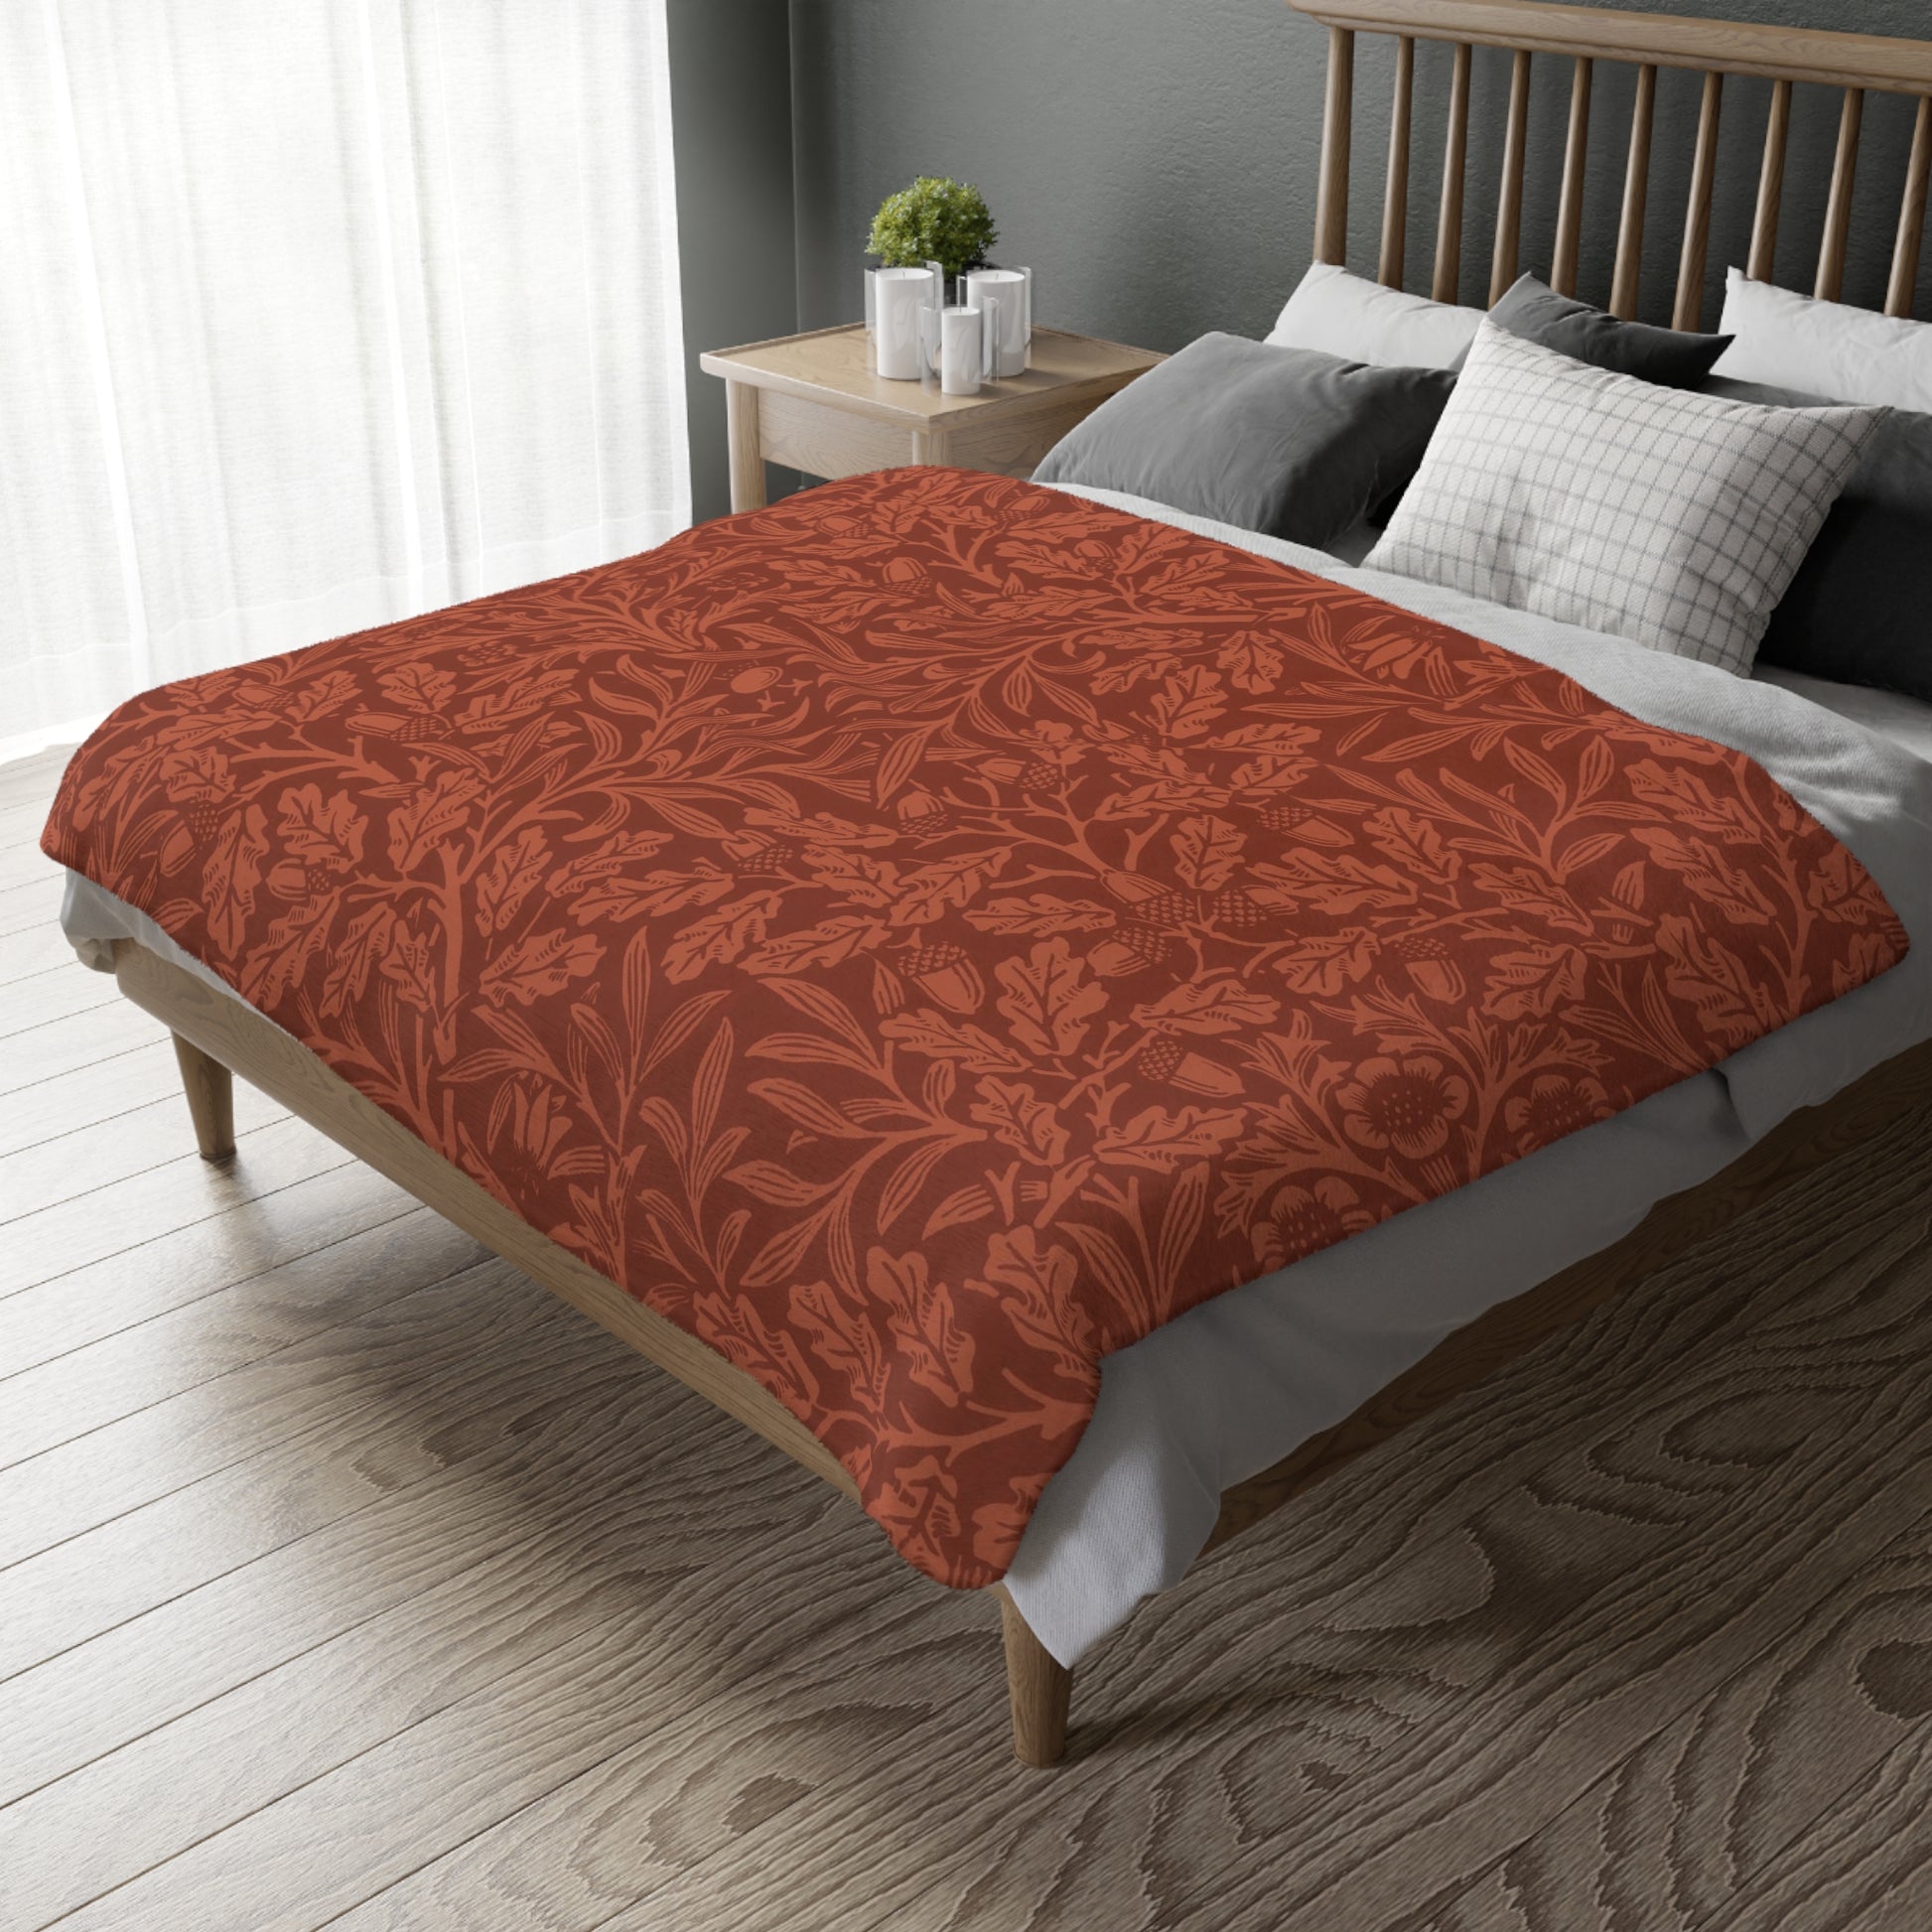 william-morris-co-luxury-velveteen-minky-blanket-two-sided-print-acorns-and-oak-leaves-collection-6